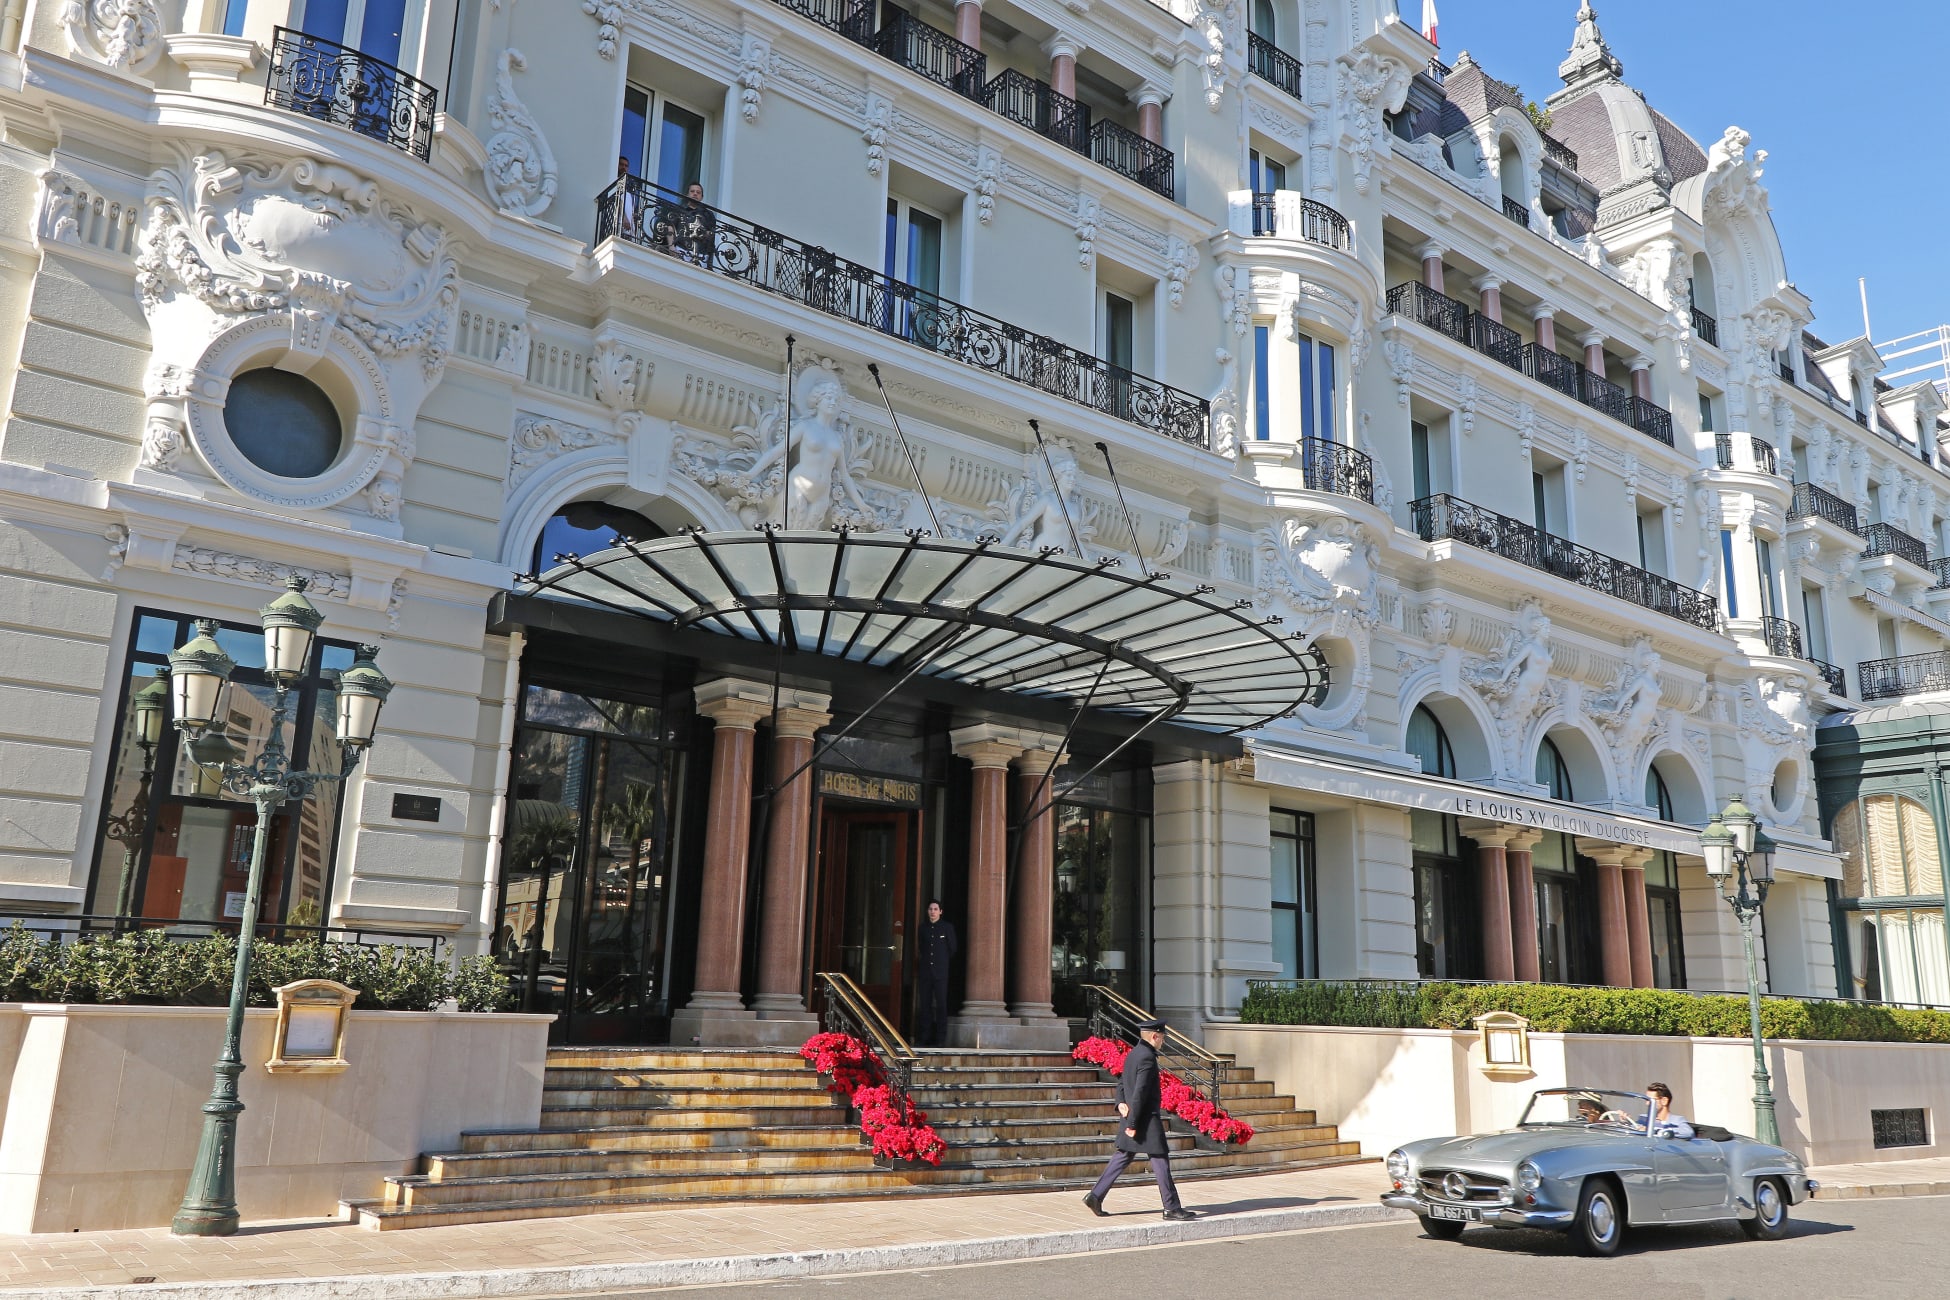 The entrance to the Hotel Paris Monte Carlo.